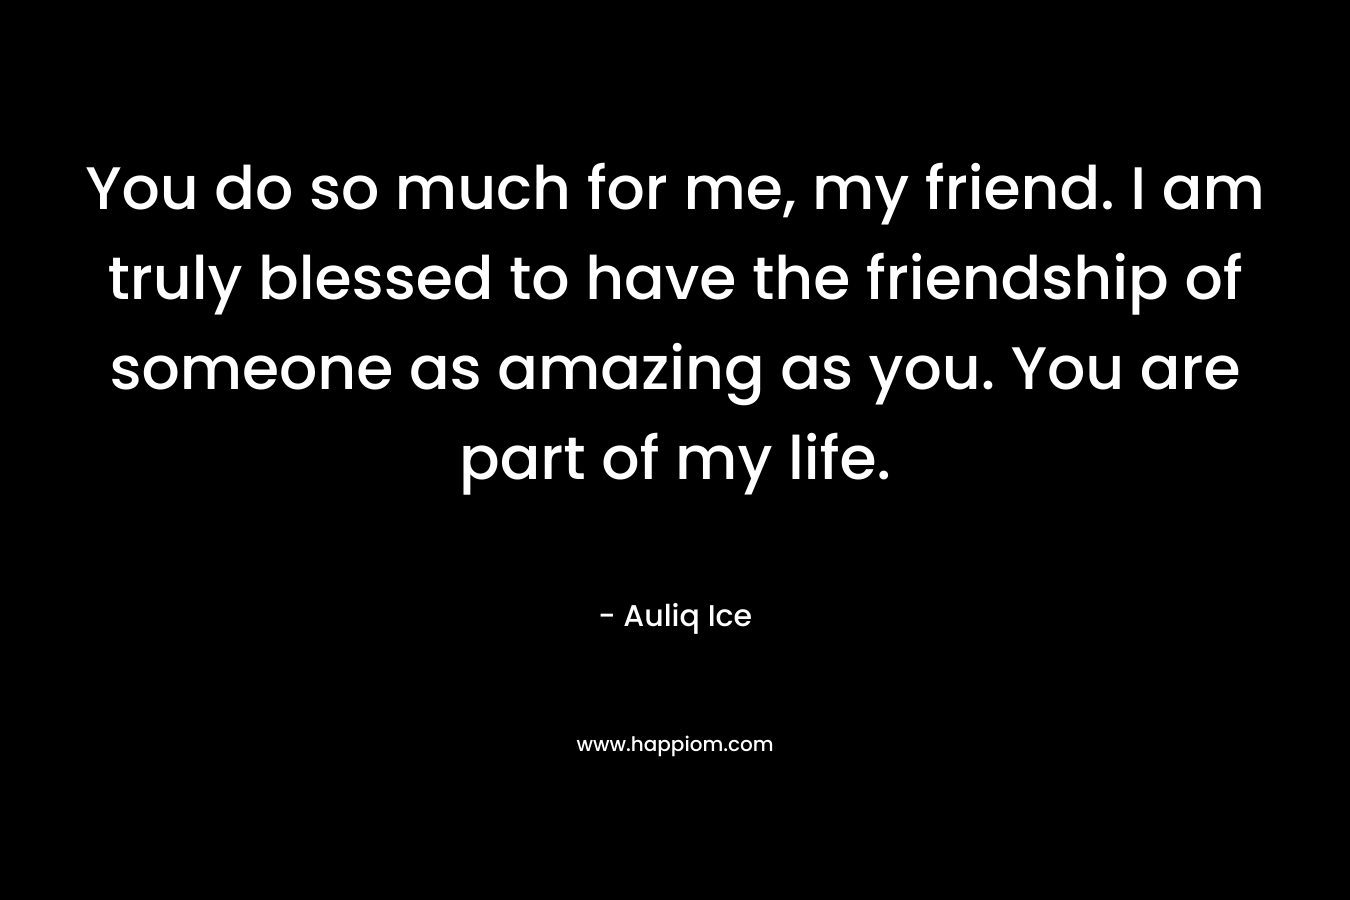 You do so much for me, my friend. I am truly blessed to have the friendship of someone as amazing as you. You are part of my life. – Auliq Ice